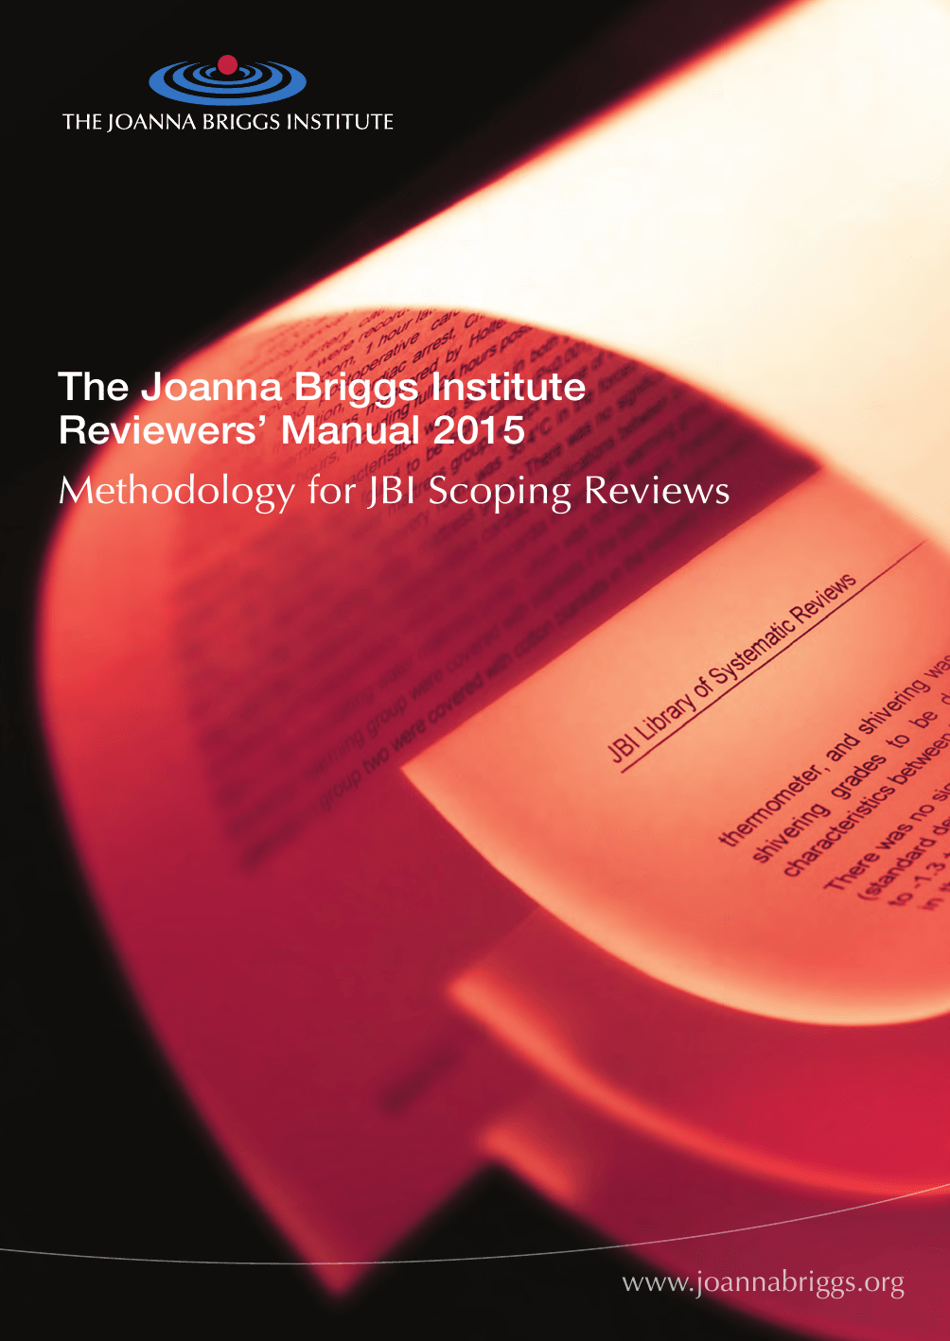 Image preview of the document titled "Methodology for Jbi Scoping Reviews - the Joanna Briggs Institute